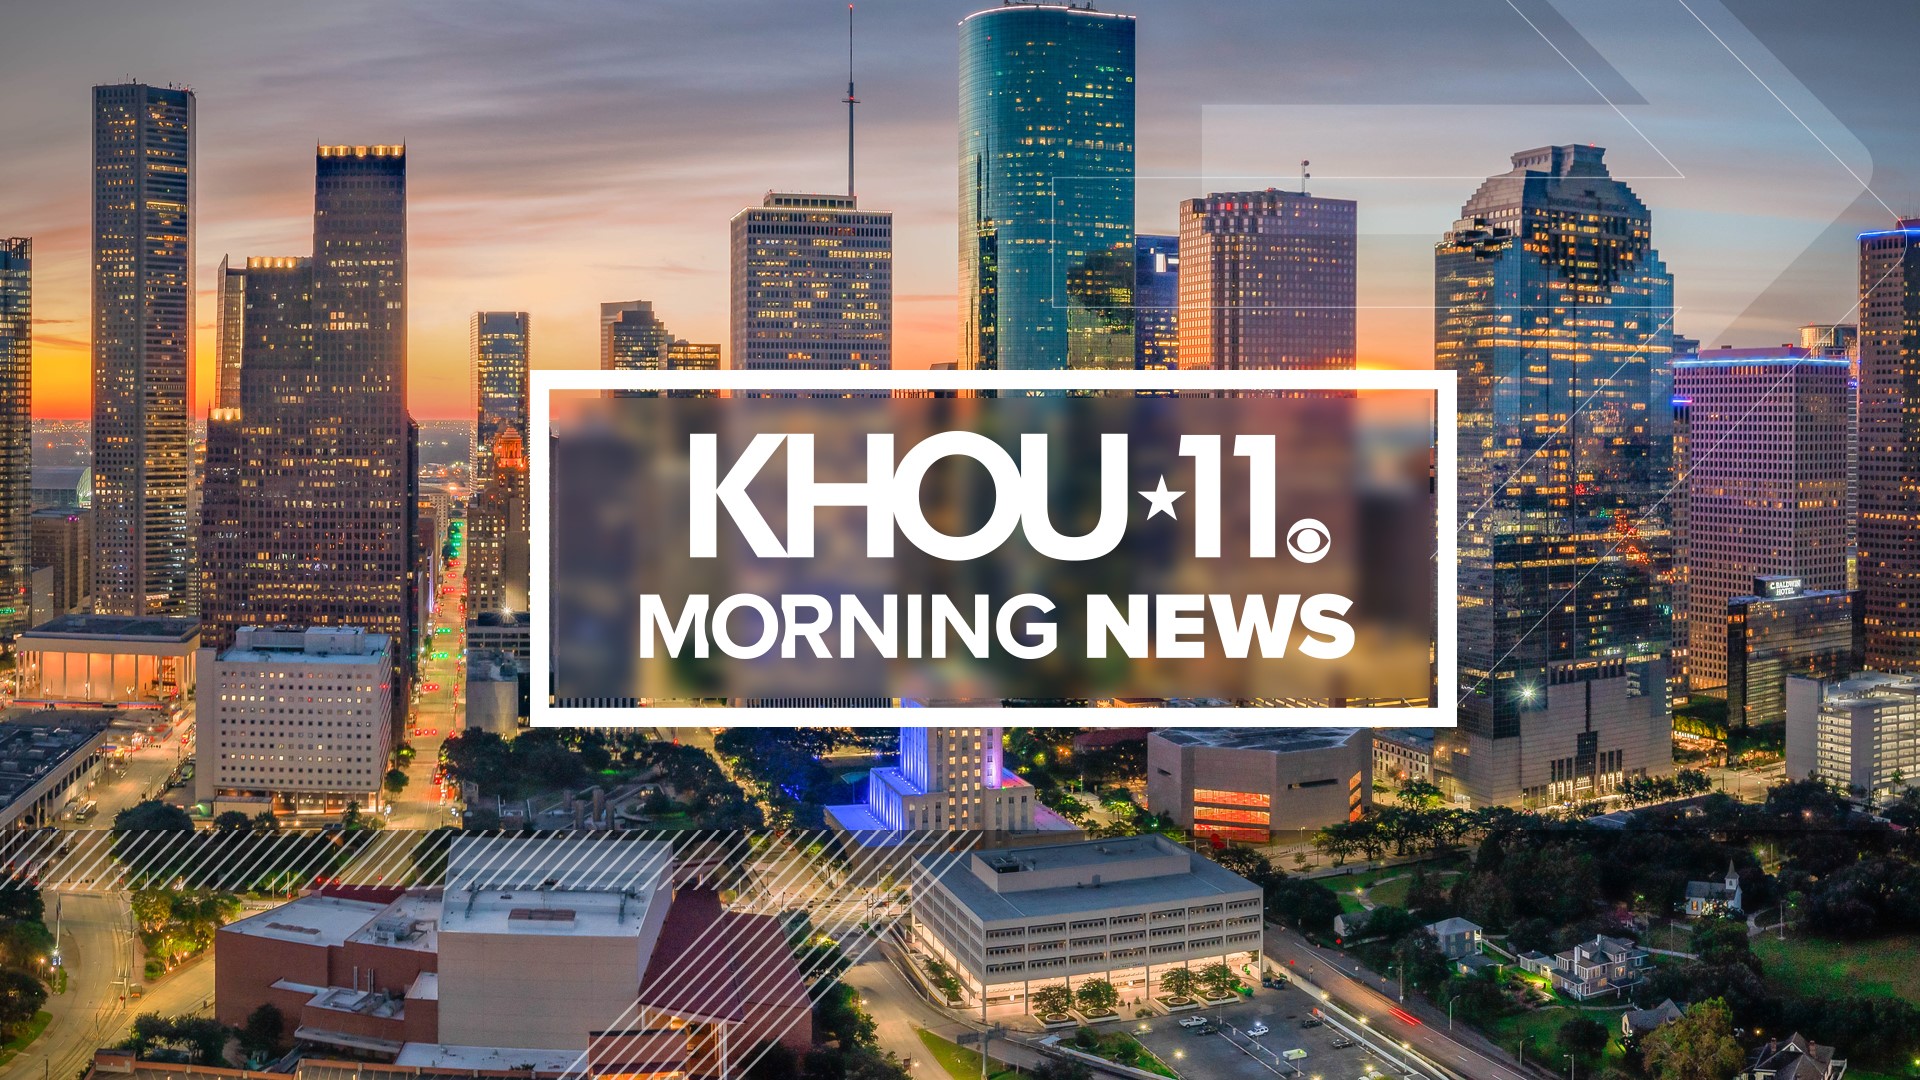 Houston morning newscast featuring breaking news from overnight, local weather and traffic. KHOU Stands for Houston.